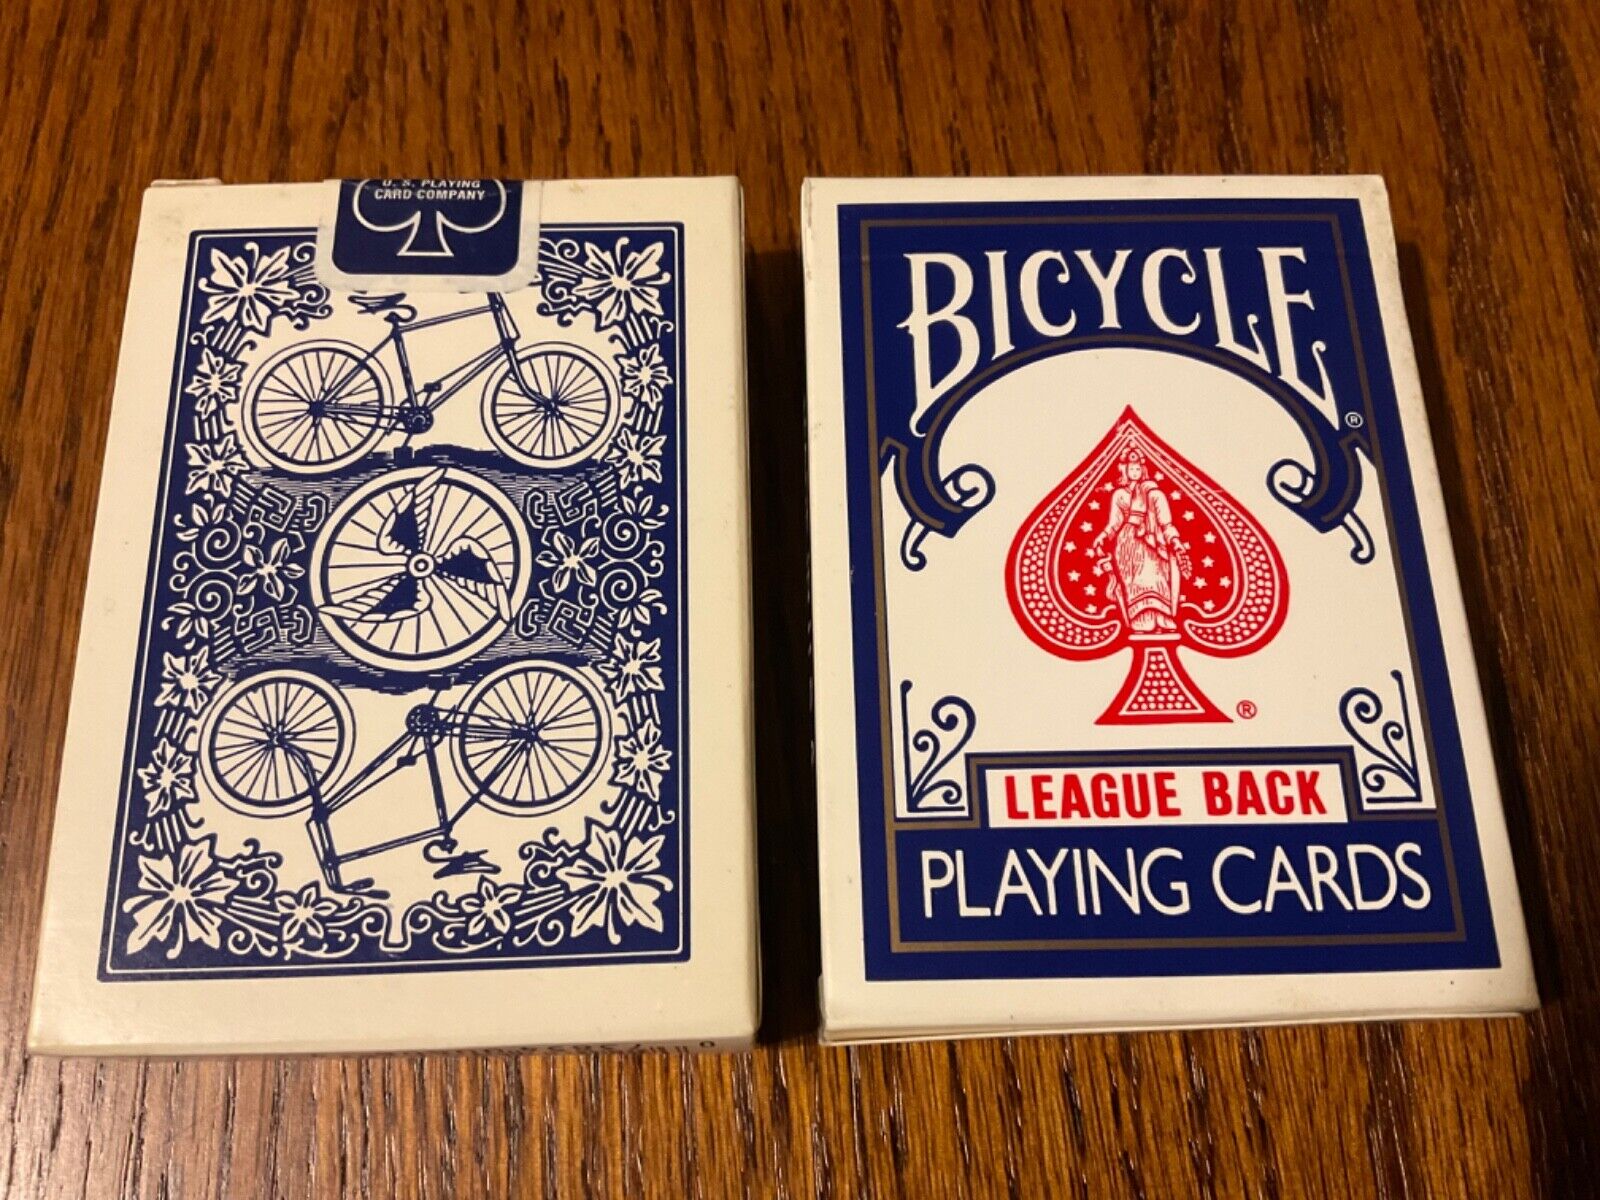 Vintage Bicycle Poker 808 League Back U.S. Playing Cards Co. 2 Decks Unopened